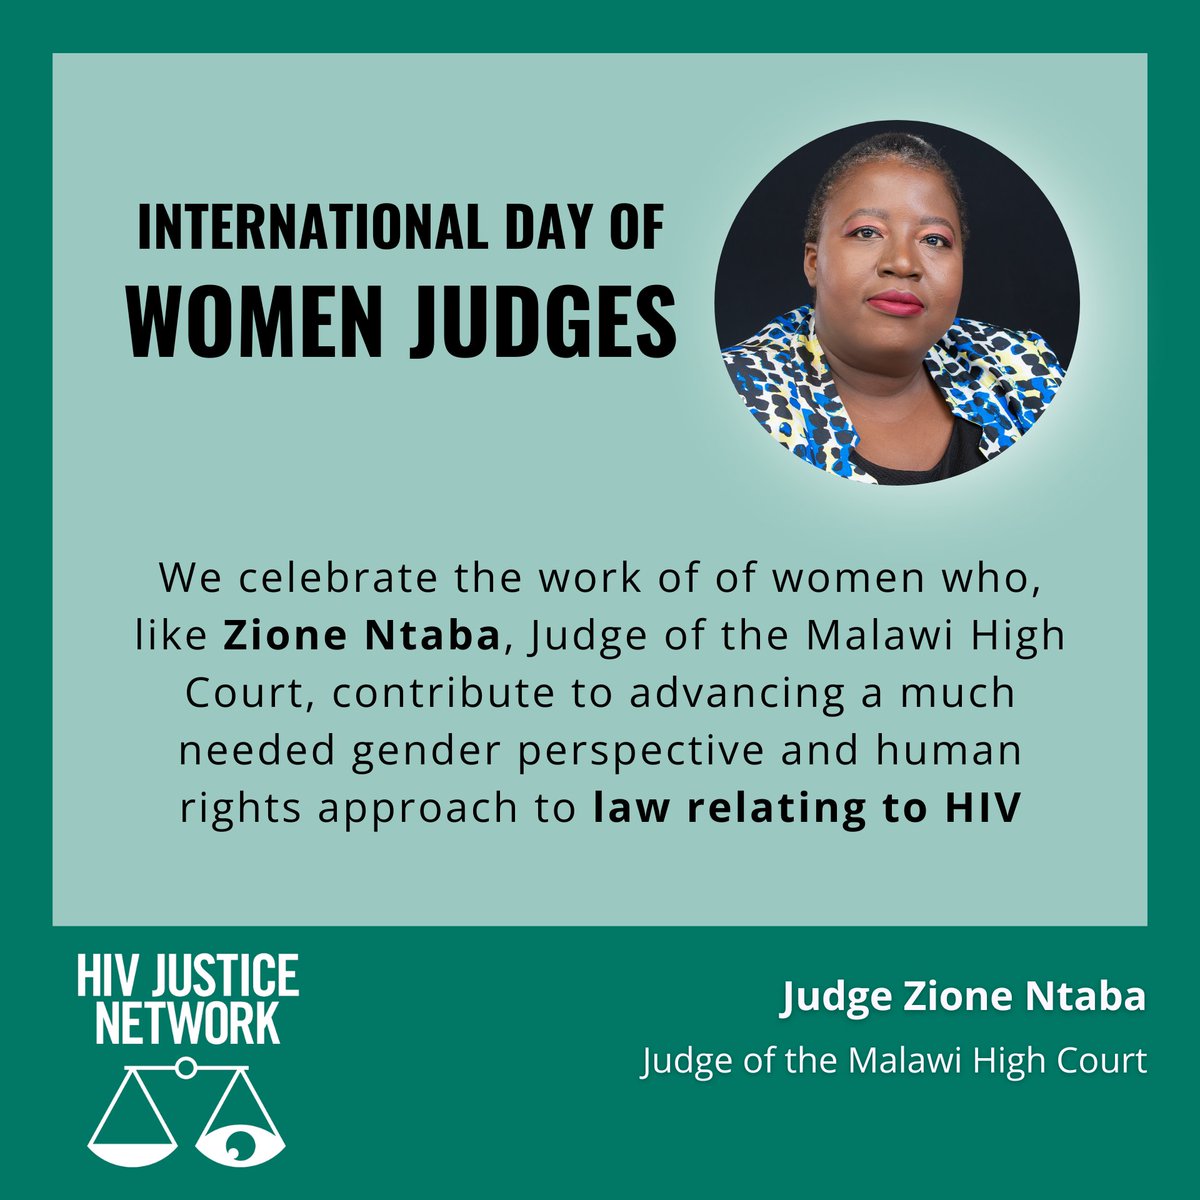 ⚖️ Today we celebrate our GAP member Justice Zione Ntaba who fight for #HIV justice on #WomenJudges Day! Women Judges champion a gendered approach protecting women living with HIV from unjust criminal laws. #HIVIsNotACrime hivjustice.net/news/feature-i…